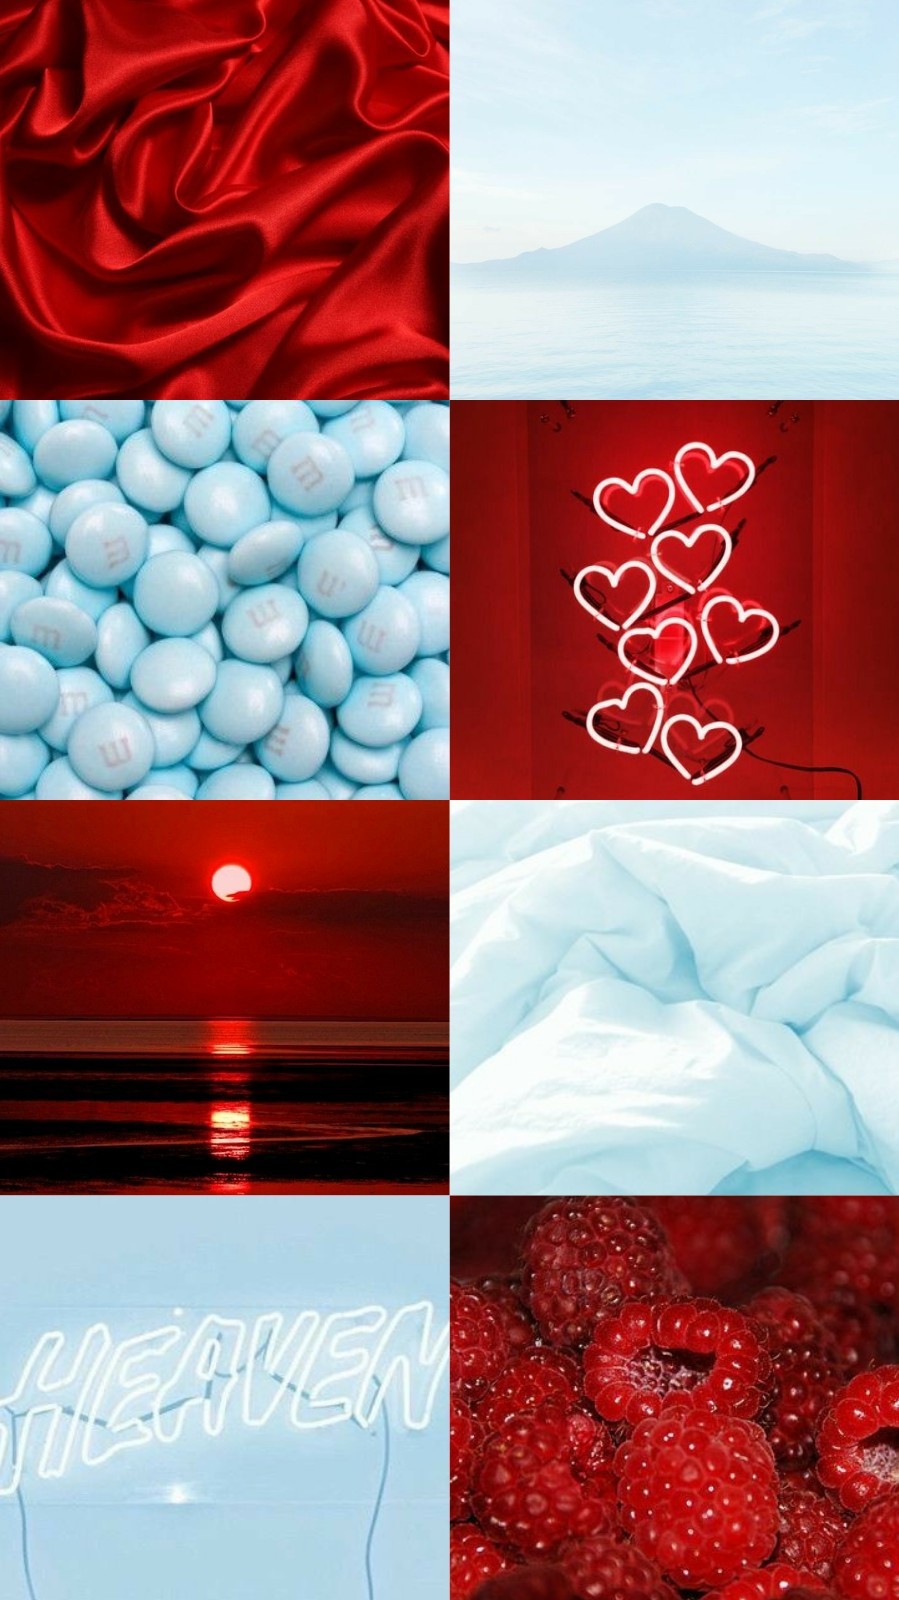 Aesthetic Wallpaper Light Blue And Red